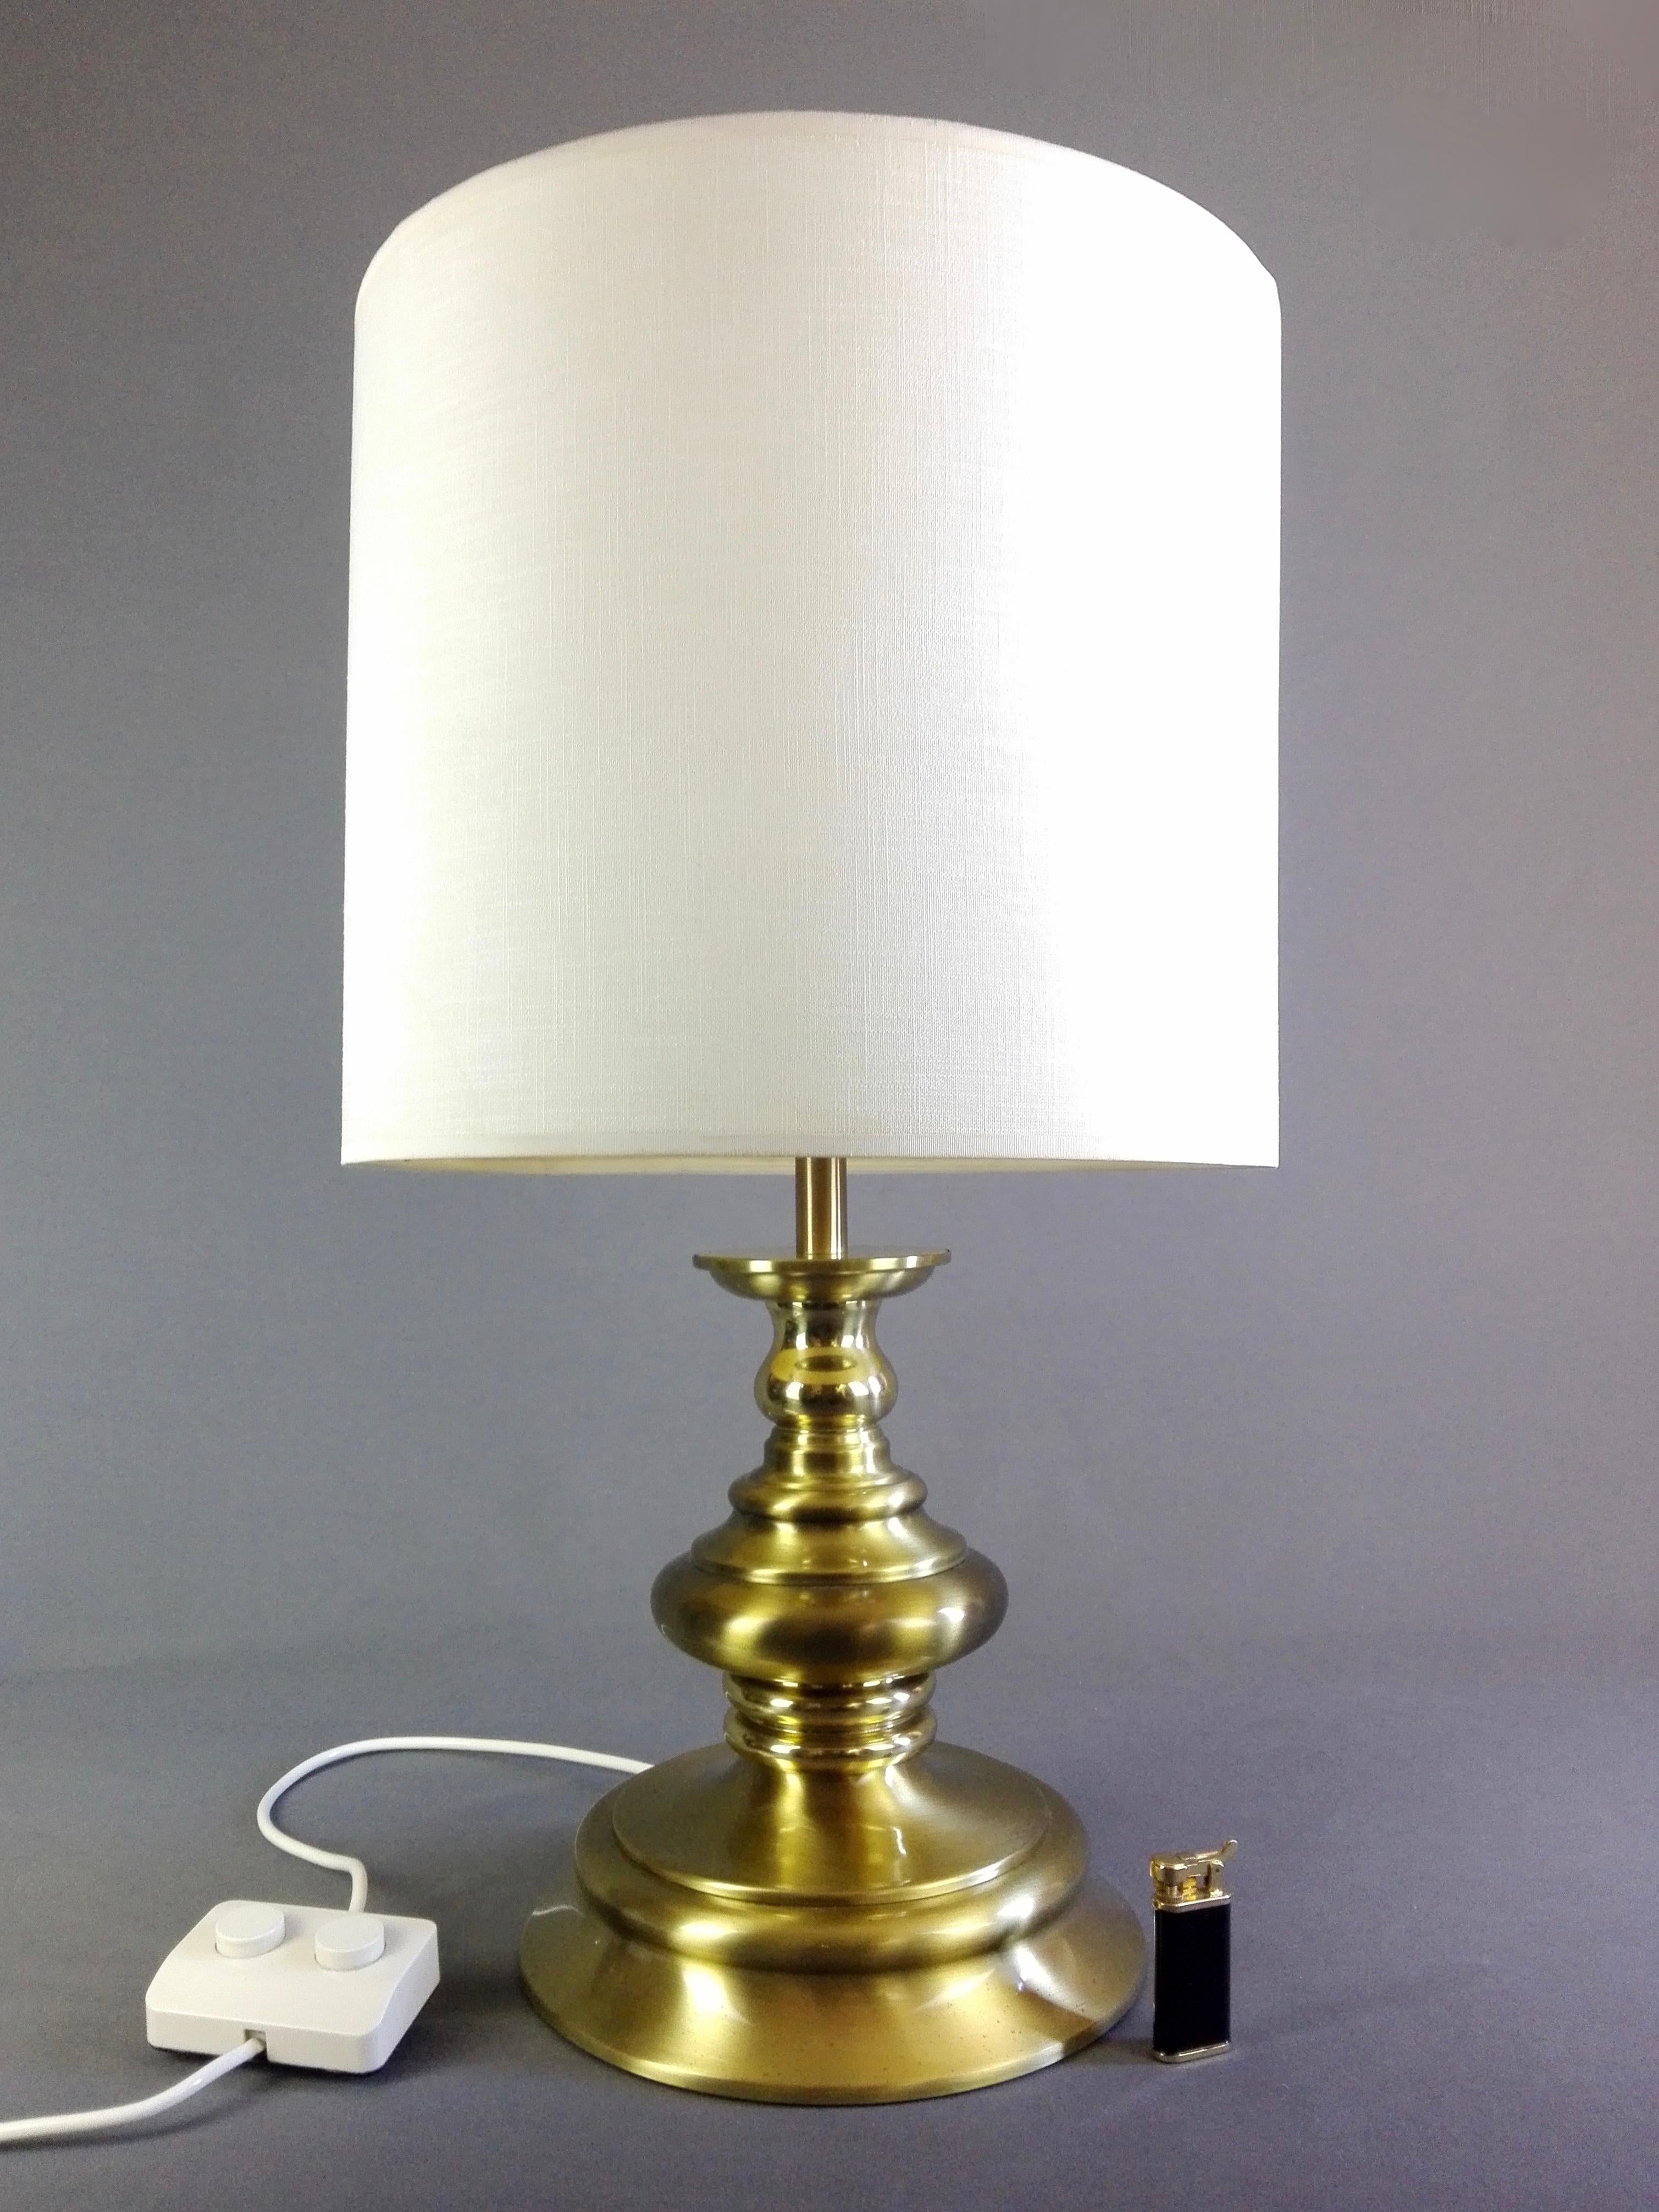 Beautiful and large Reggiani 1960s three-light table or floor lamp in solid brass, with double on/off switch and original textile lampshade. The frame is composed of various elements in brushed brass and some with a polished finish creating a